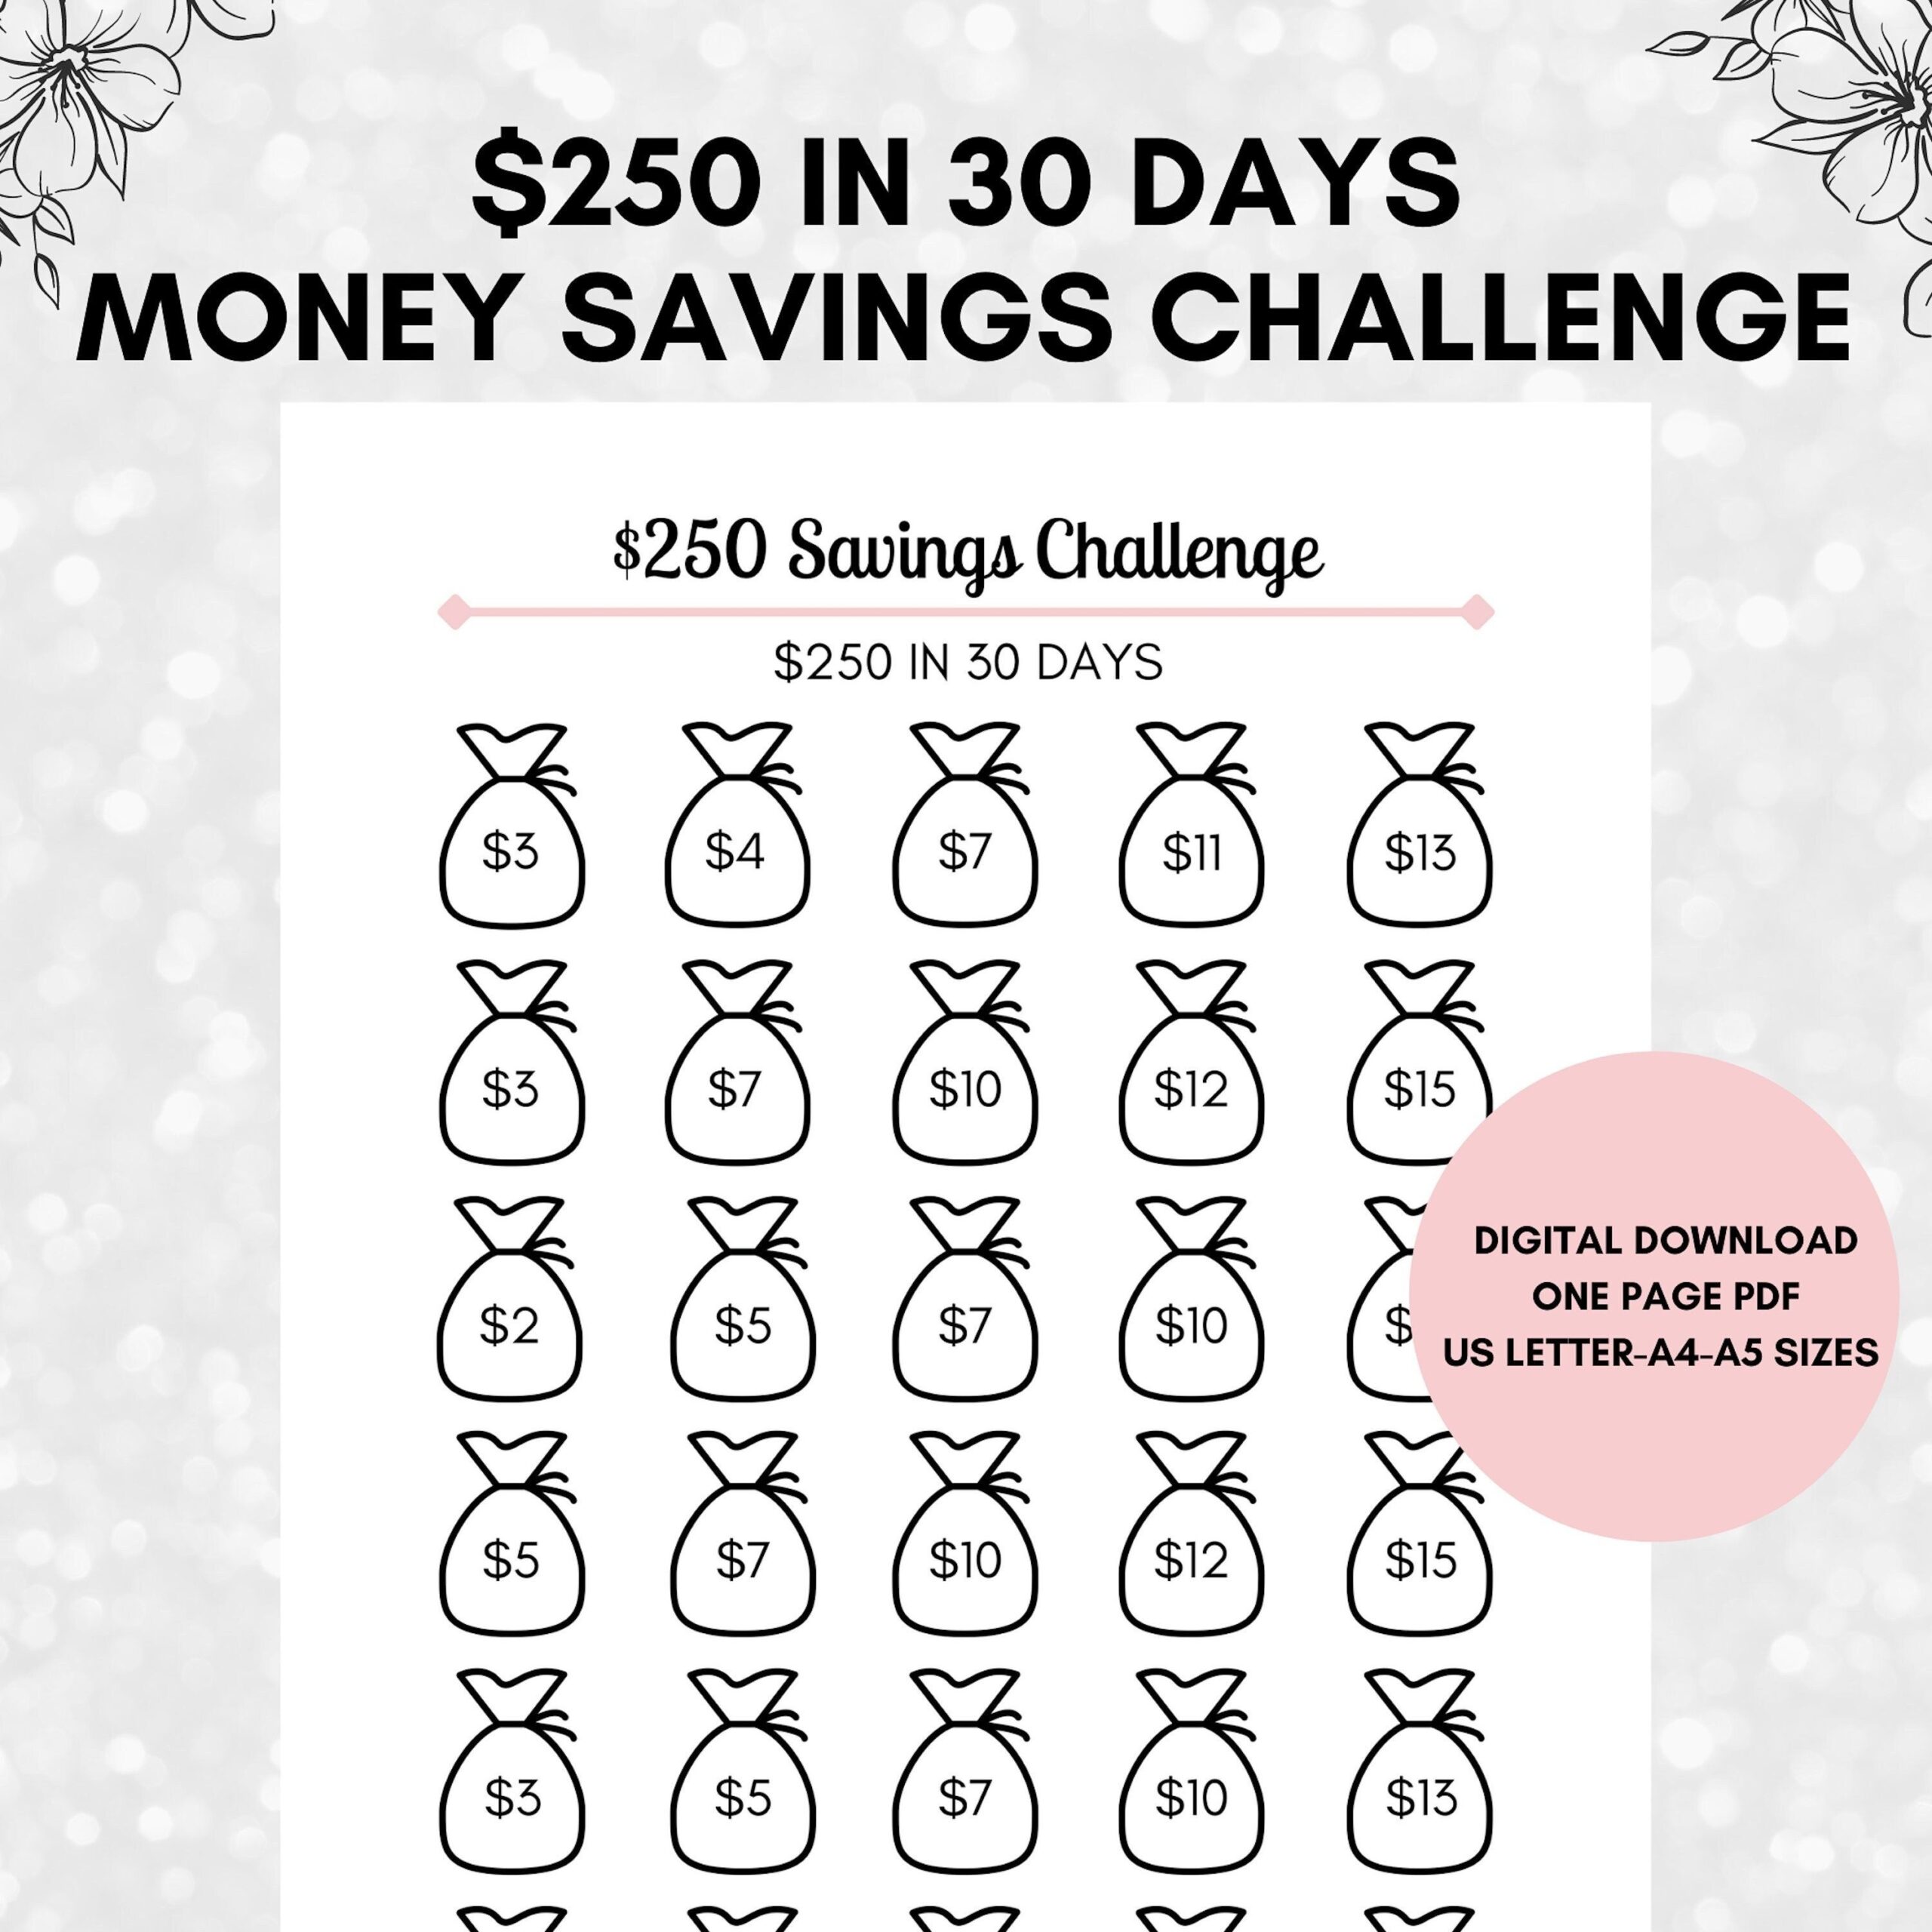 30 Day Challenge Printable To Save 100 Save 100 In 30 Days No Spend Saving Printable DIY Cash Envelope Included US Letter A4 A5 A6 Etsy Canada Savings Challenge Money Saving Challenge Saving Money